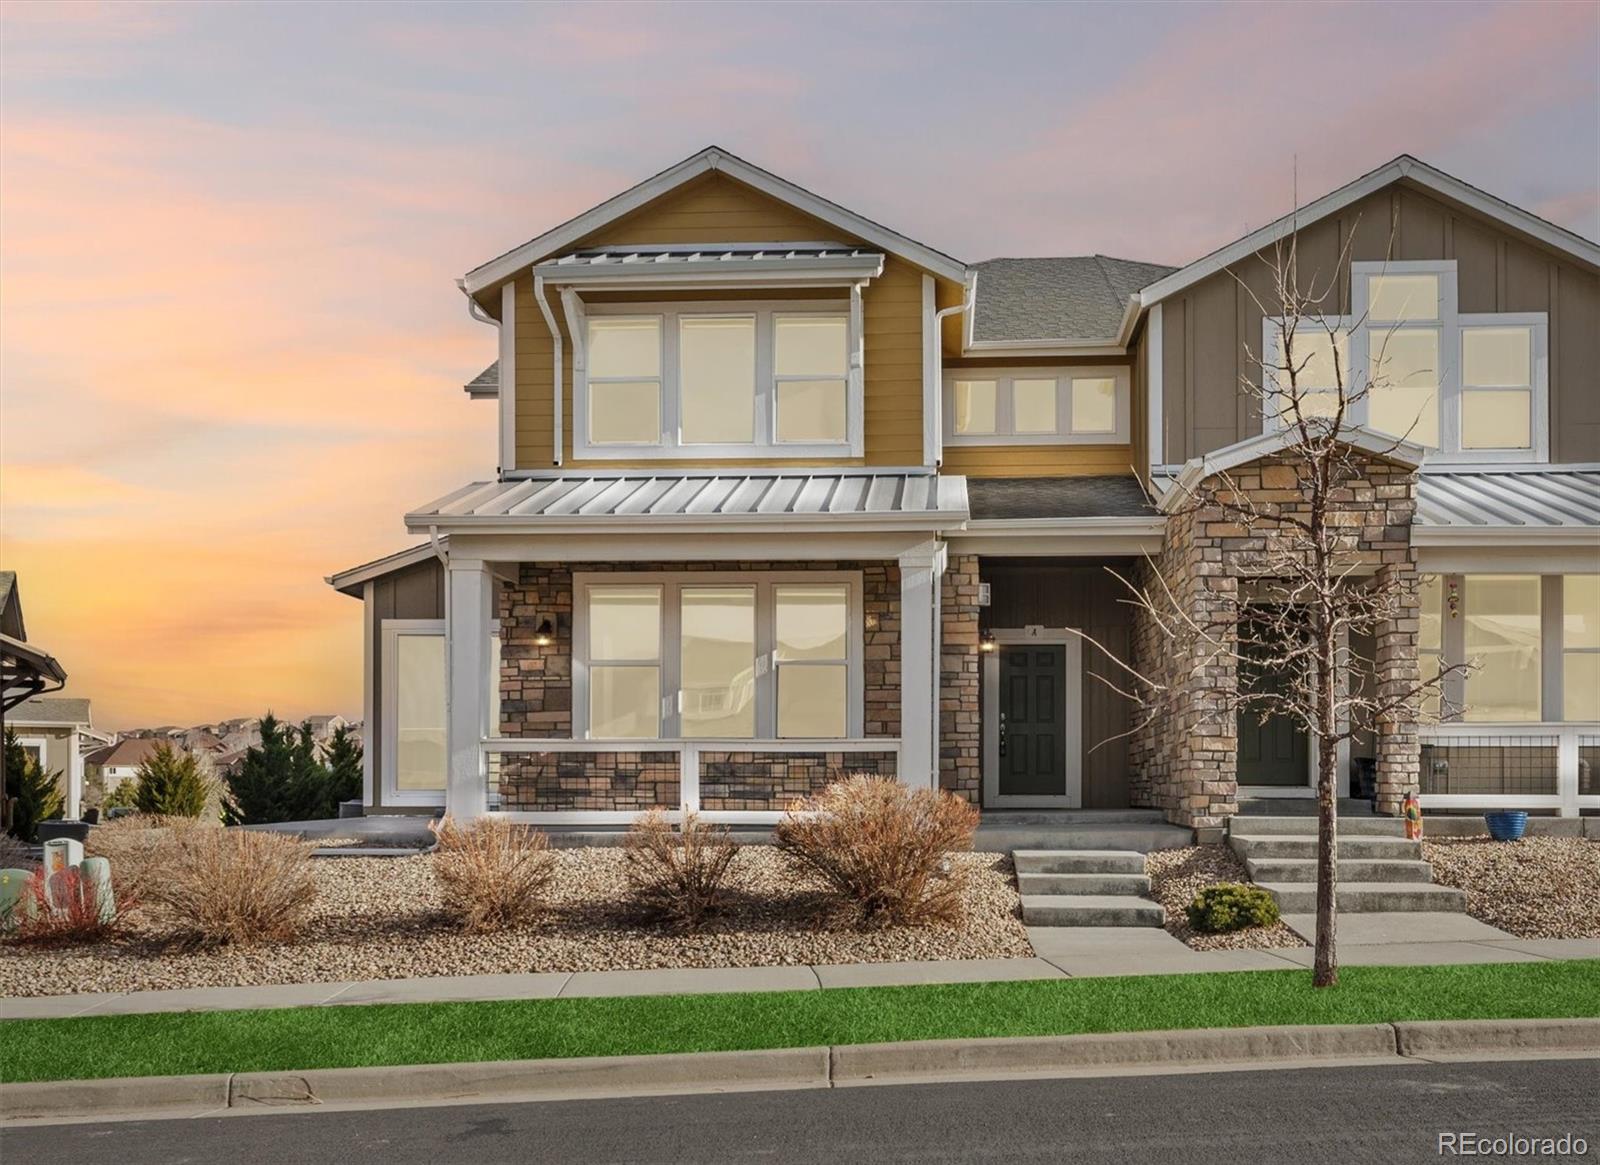 14254 W 88th Drive A, Arvada  MLS: 8477875 Beds: 3 Baths: 3 Price: $695,000